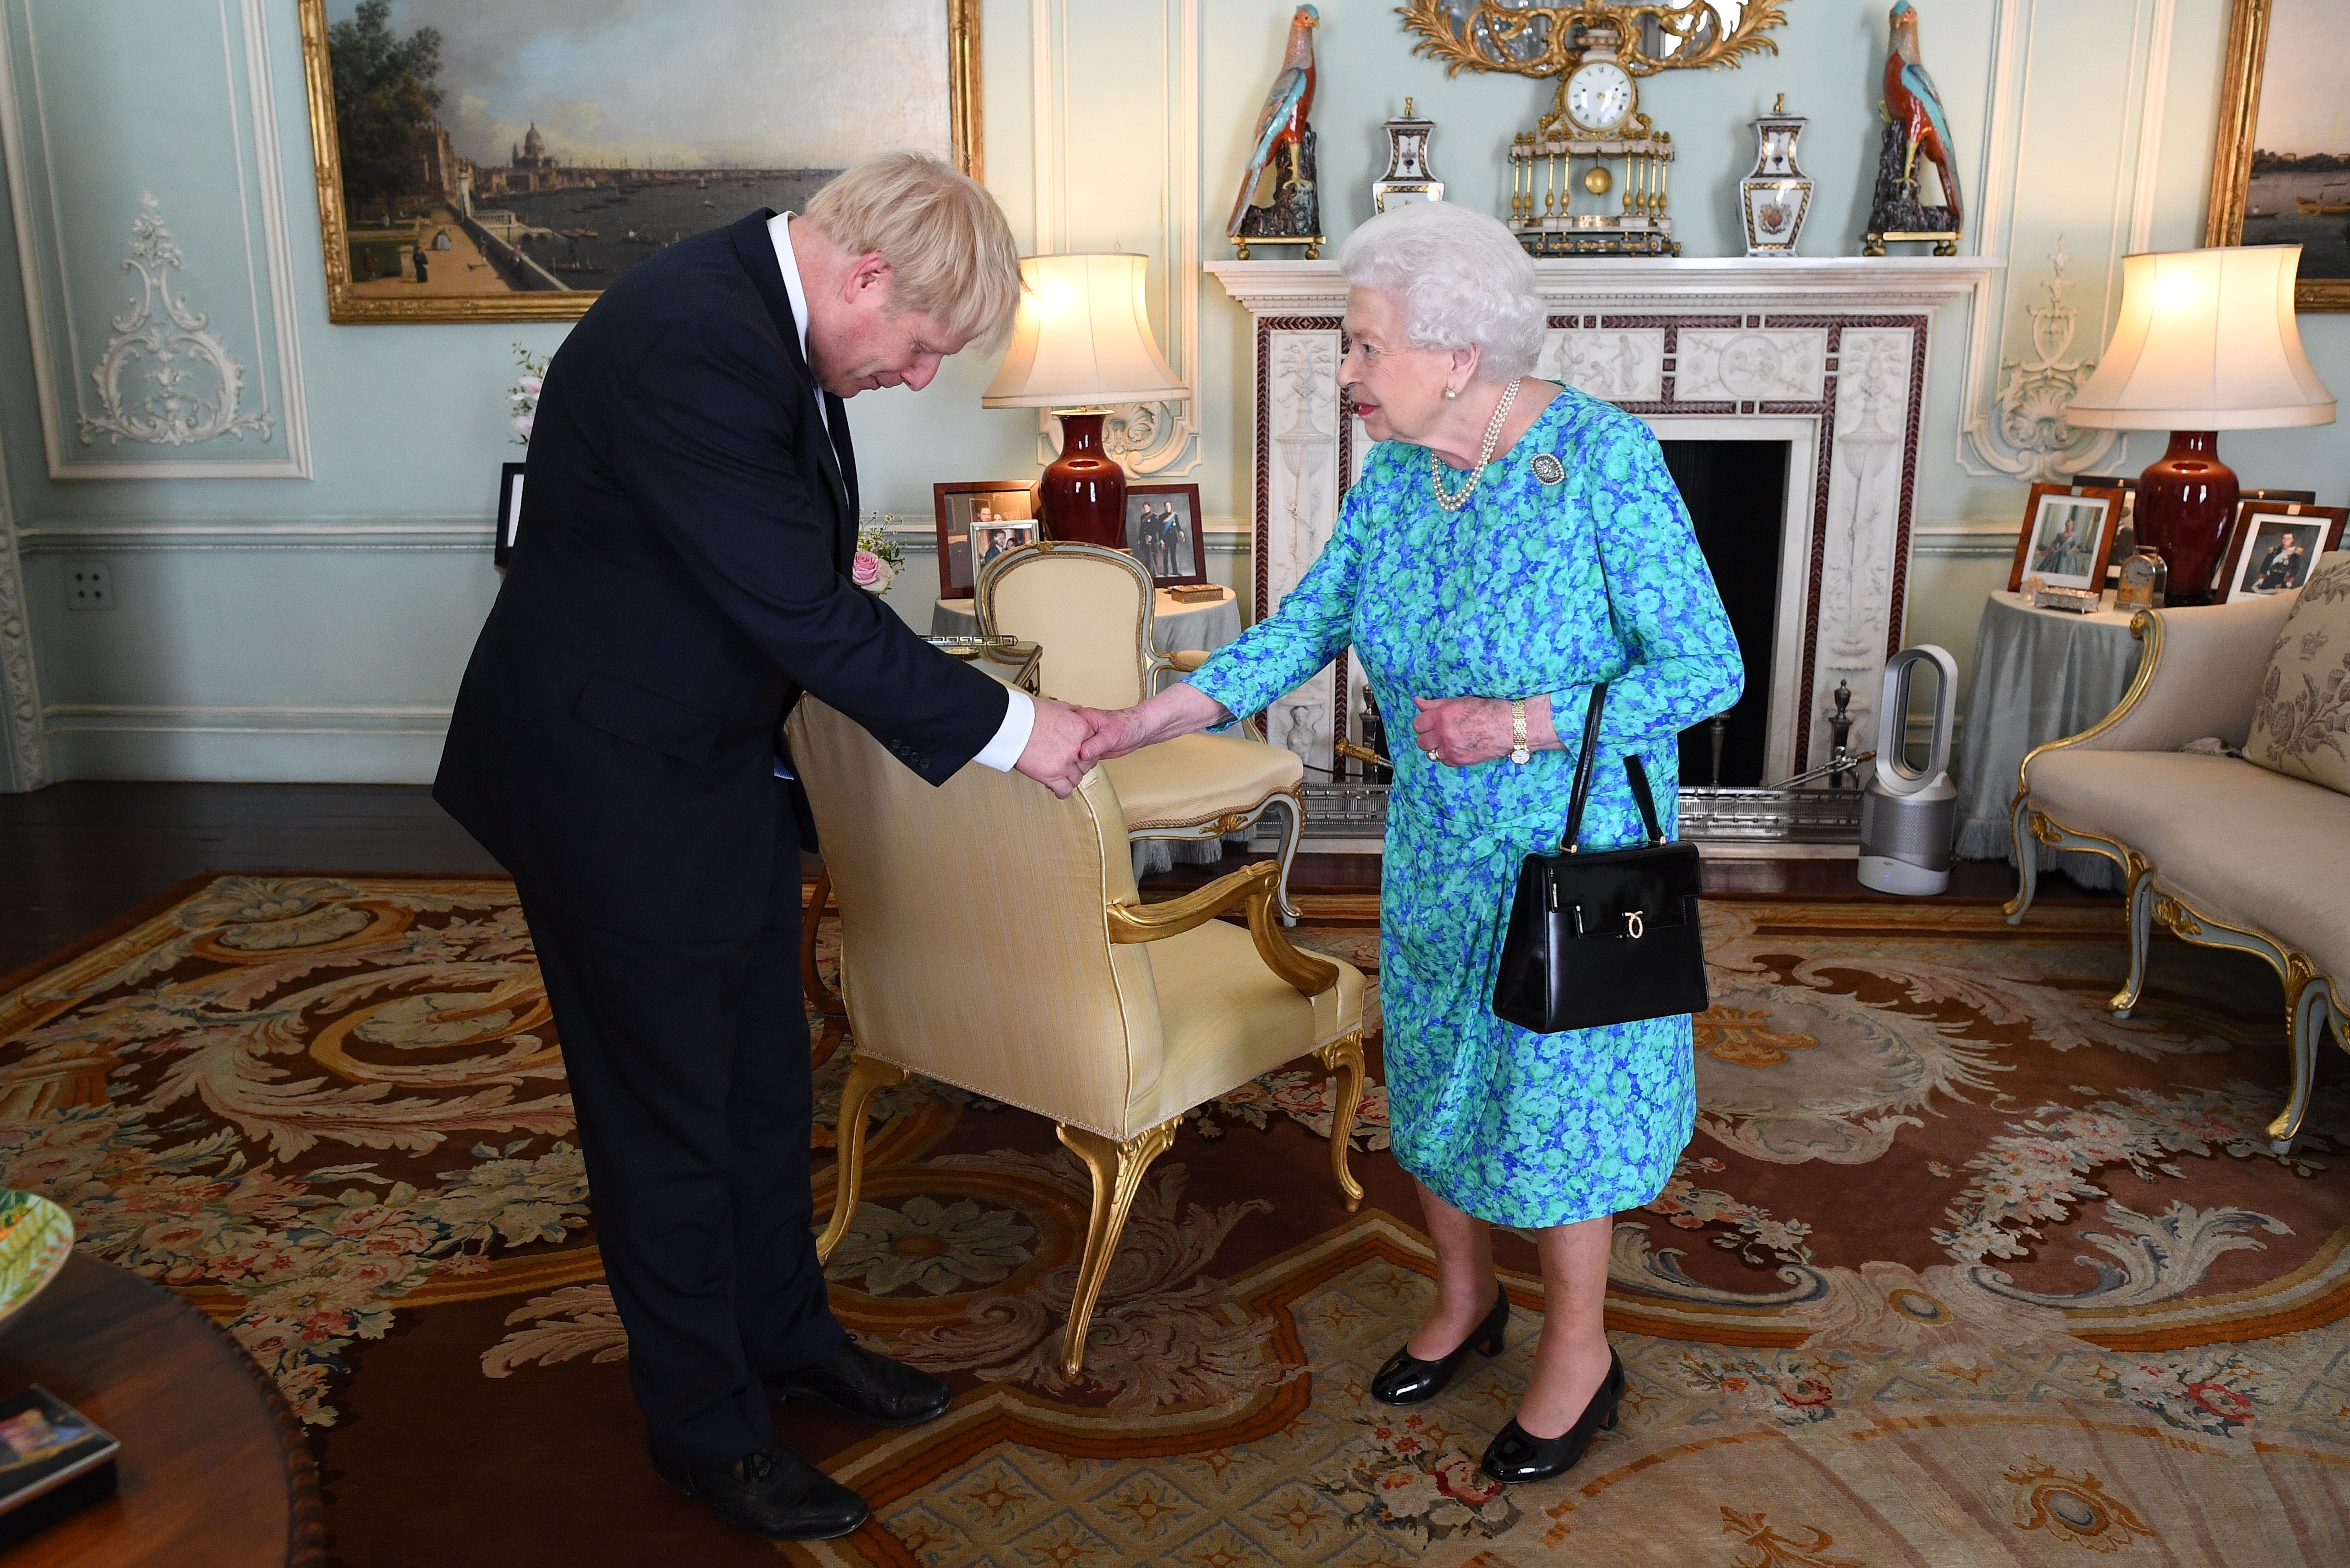 Queen Elizabeth II greets the Prime Minister of the United Kingdom, Boris Johnson in July 2019 | Photo: Getty Images